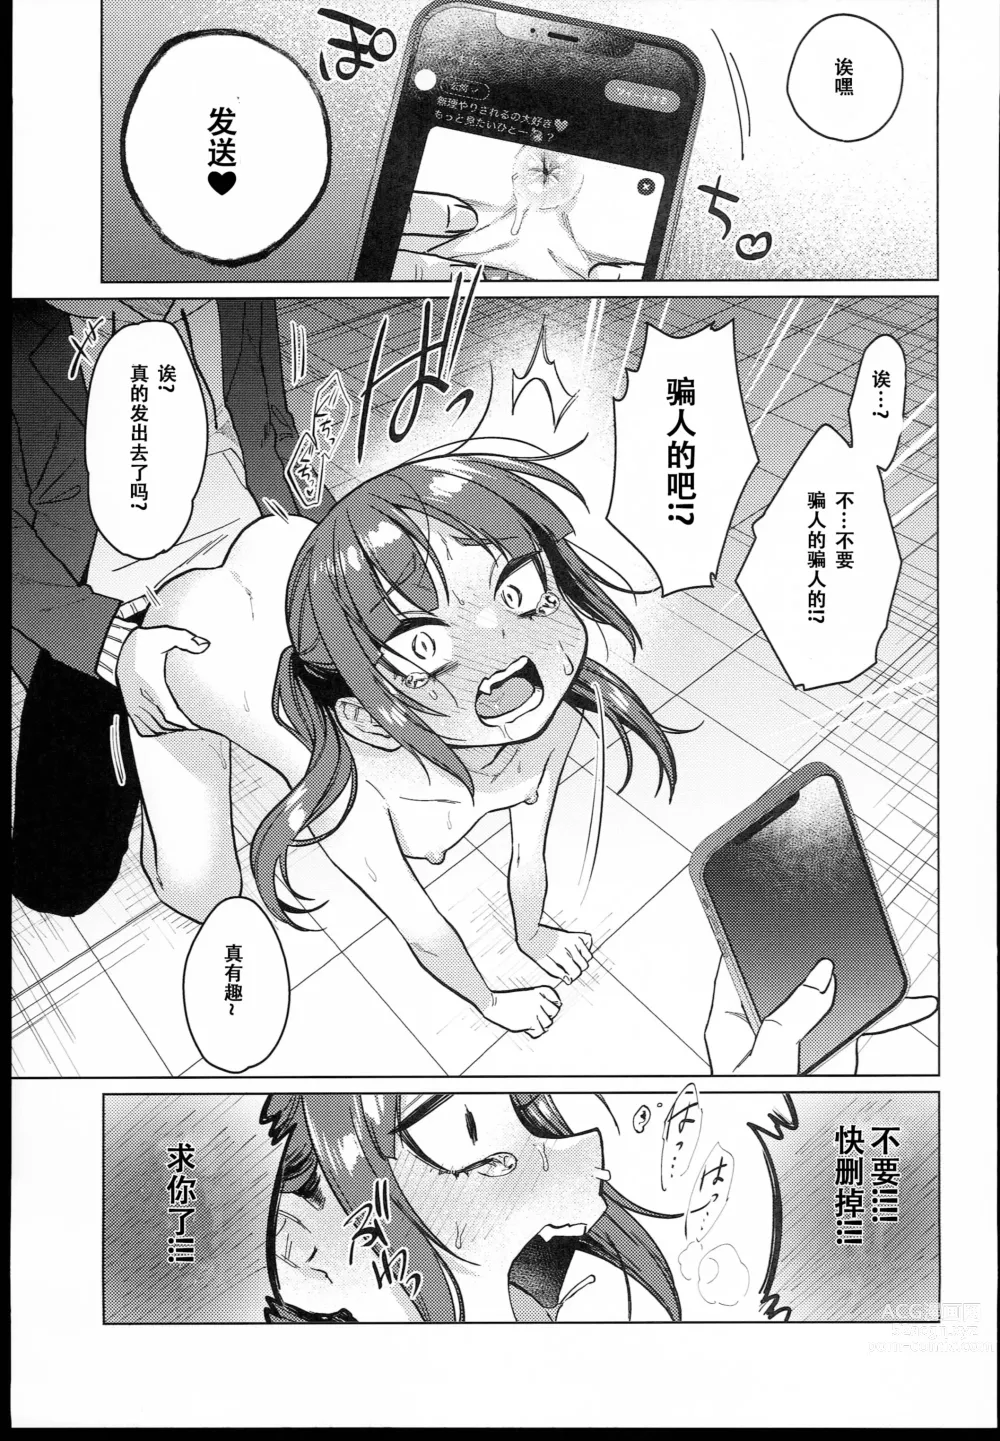 Page 5 of doujinshi 委員長は今日からみんなのオモチャ～終わった学校生活編～